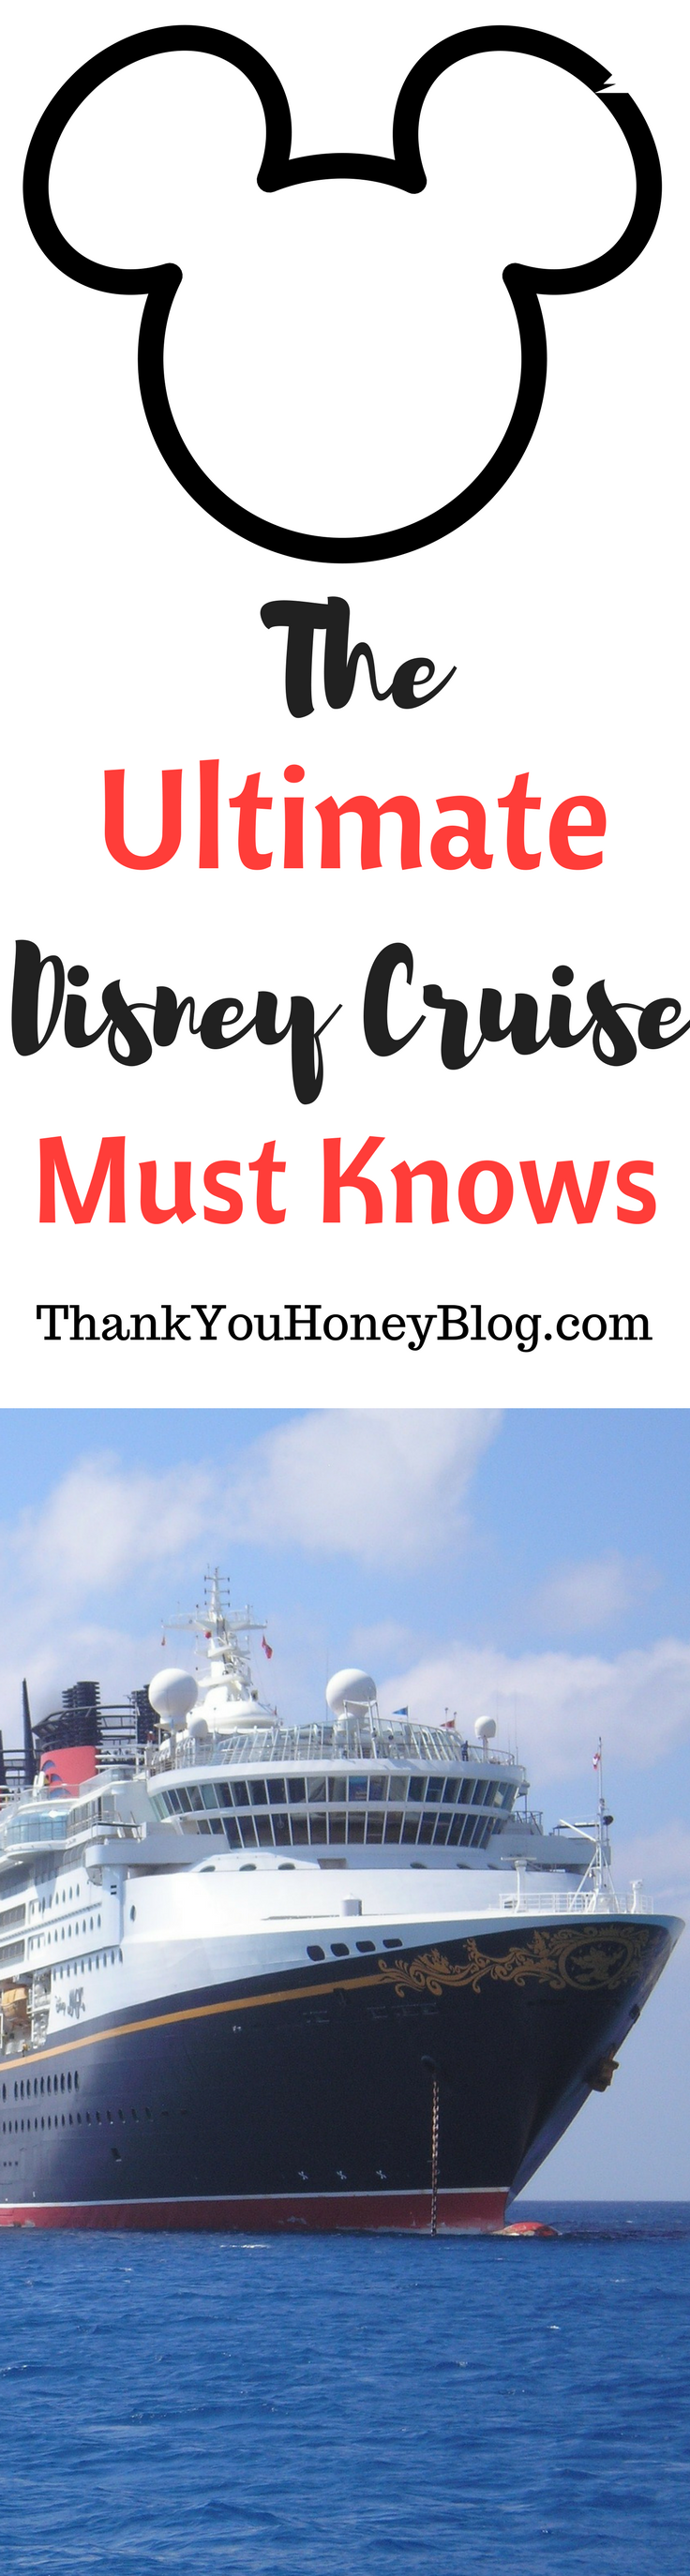 The Ultimate Disney Cruise Must Knows, Packing List, Must Knows, The Ultimate Disney Cruise Must Knows, What to Pack on a Disney Cruise, Disney Cruise, Disney, Cruise, Travel, Family Travel, ThankYouHoneyBlog.com